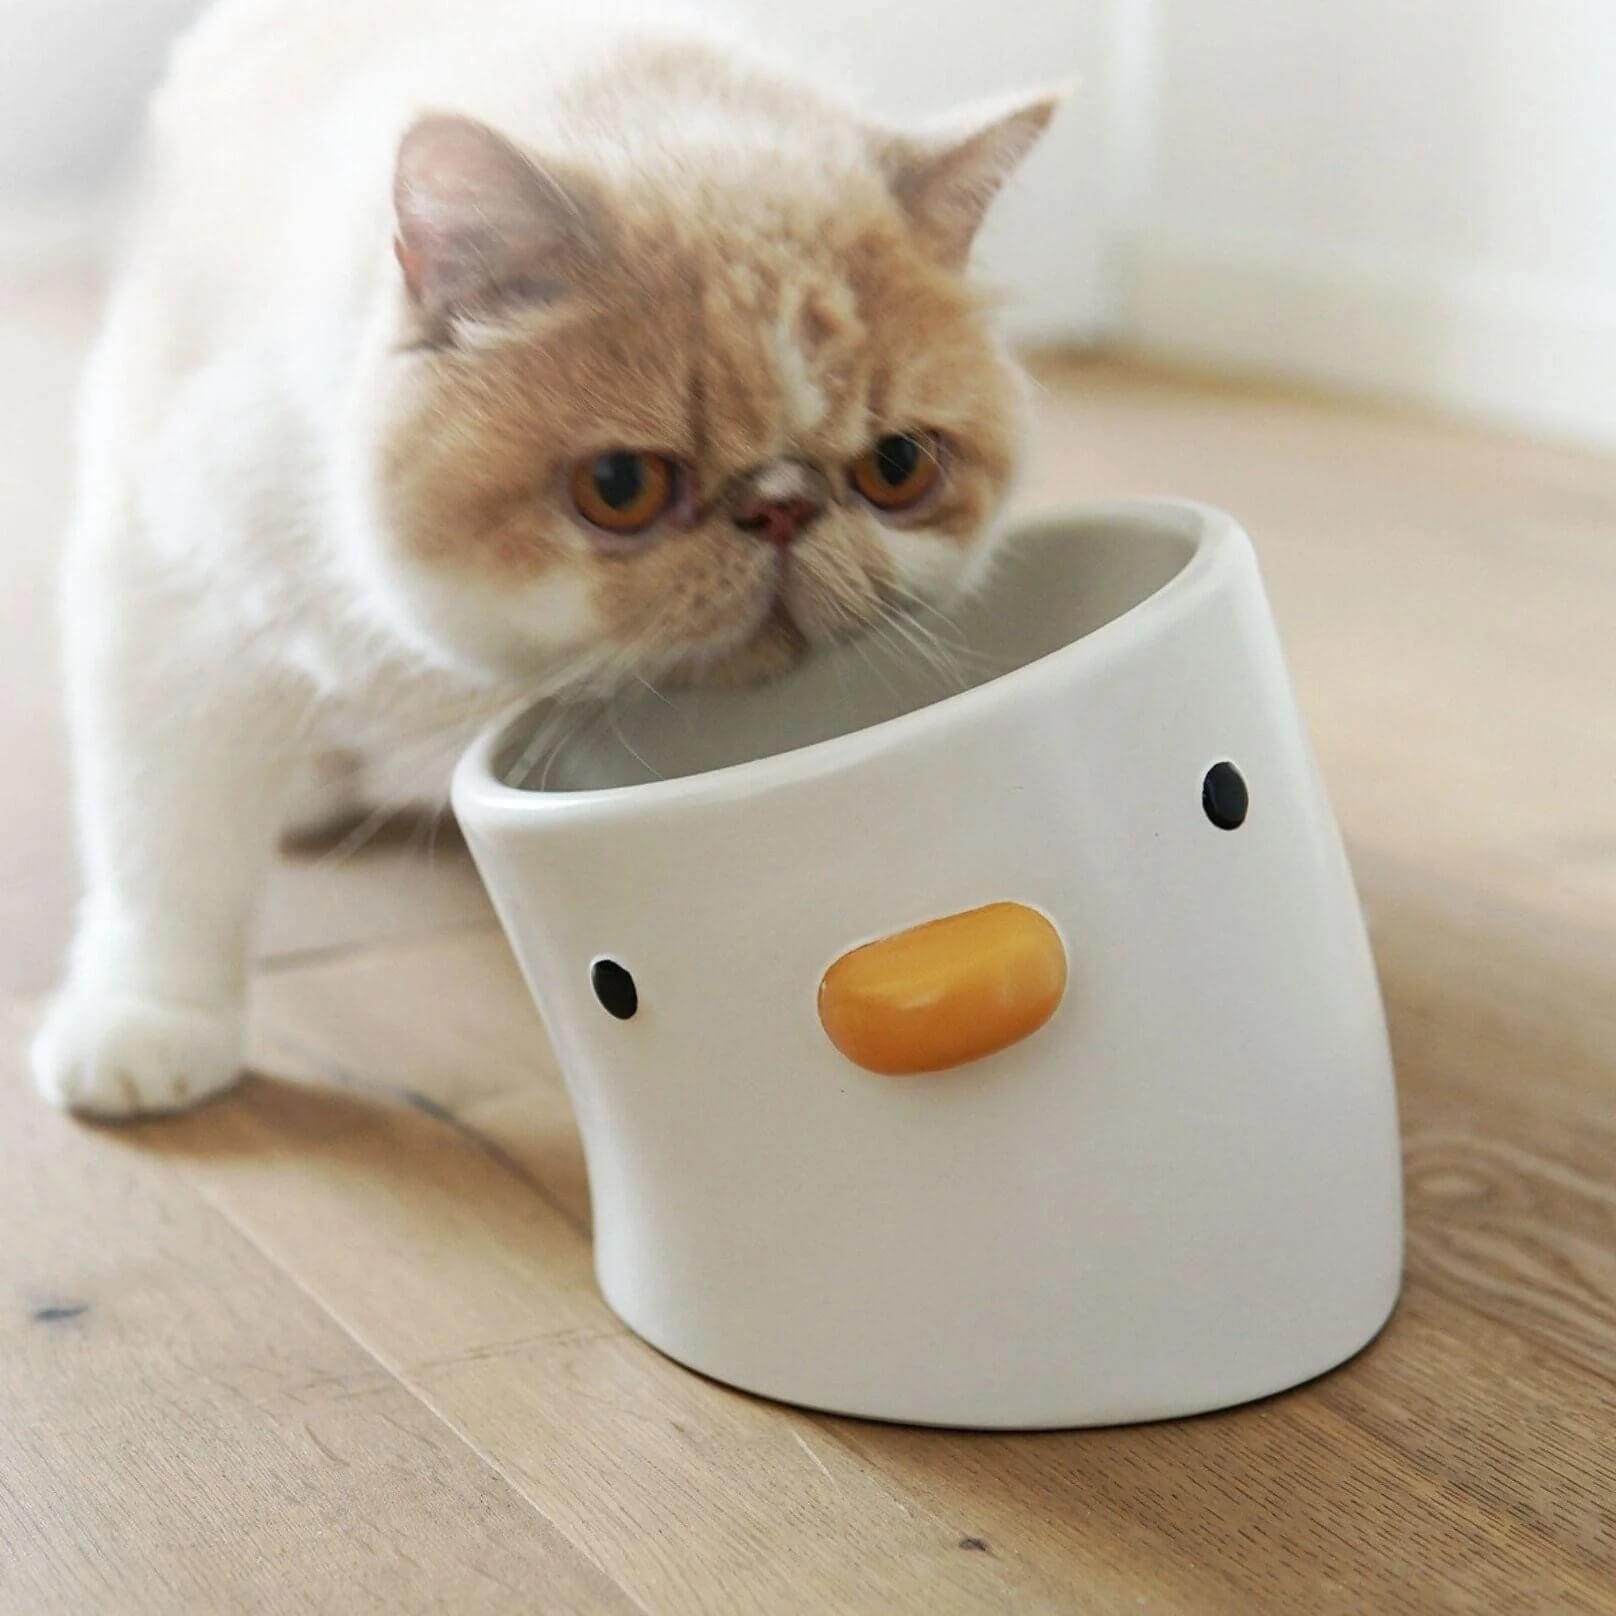 Chirpy Chick Tilted Ceramic Cat Feeding Bowl - Petites Paws